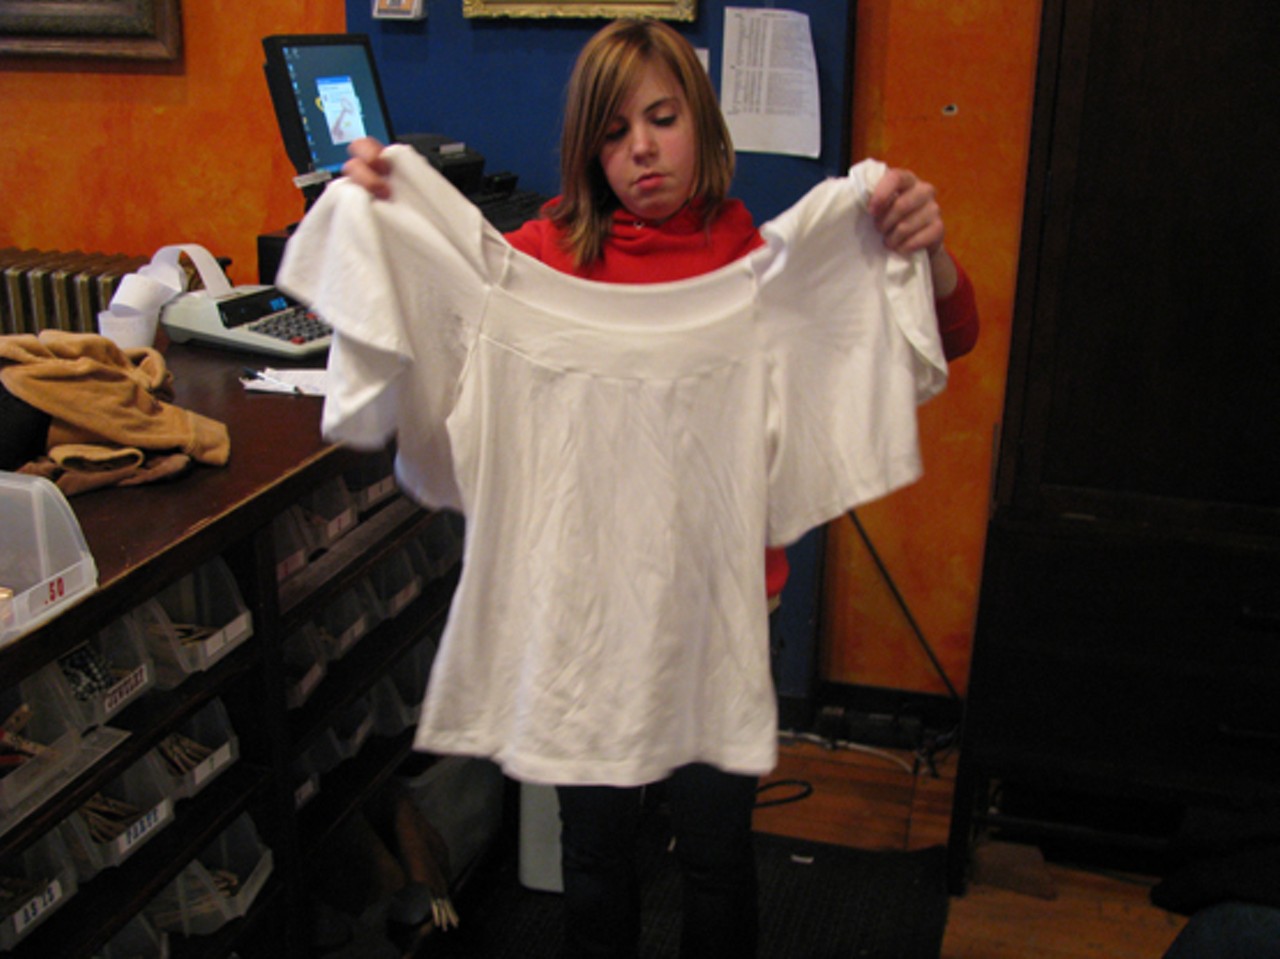 This seemingly giant white shirt will be sold for $14.50 at Rag-O-Rama.